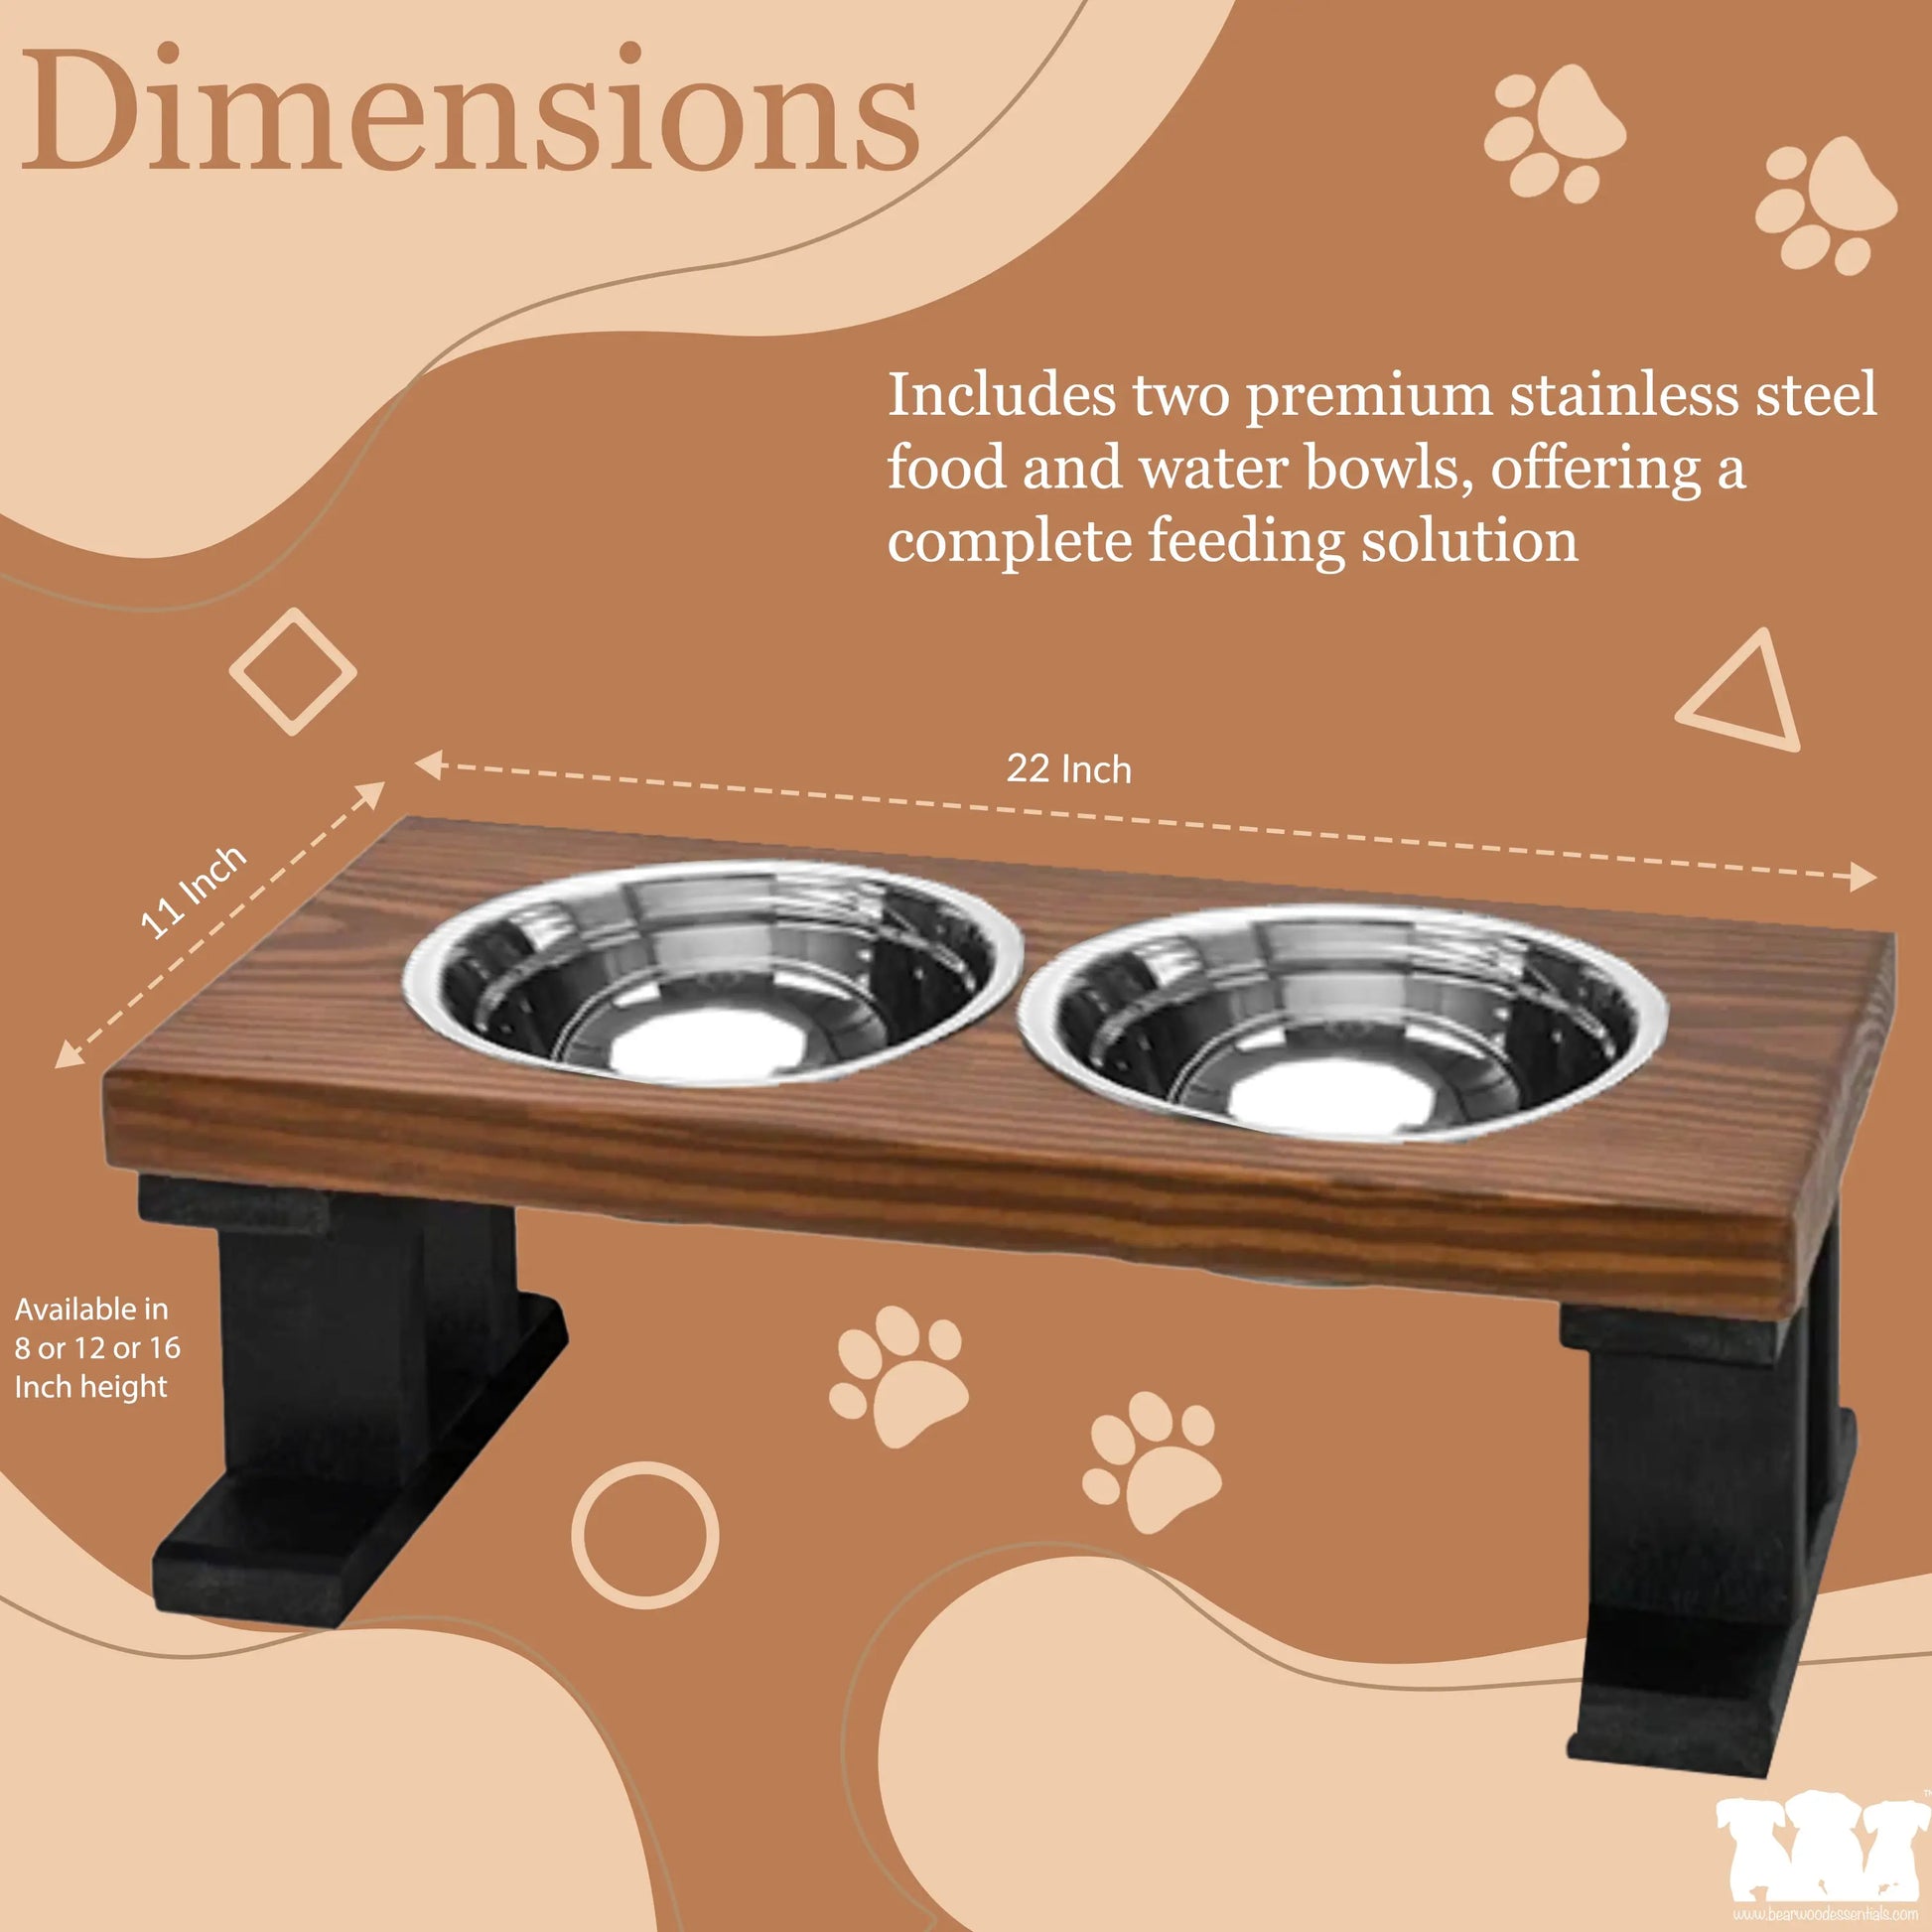 Bearwood Essentials 3 Bowl Farmhouse Style Pet Elevated Feeder & Reviews